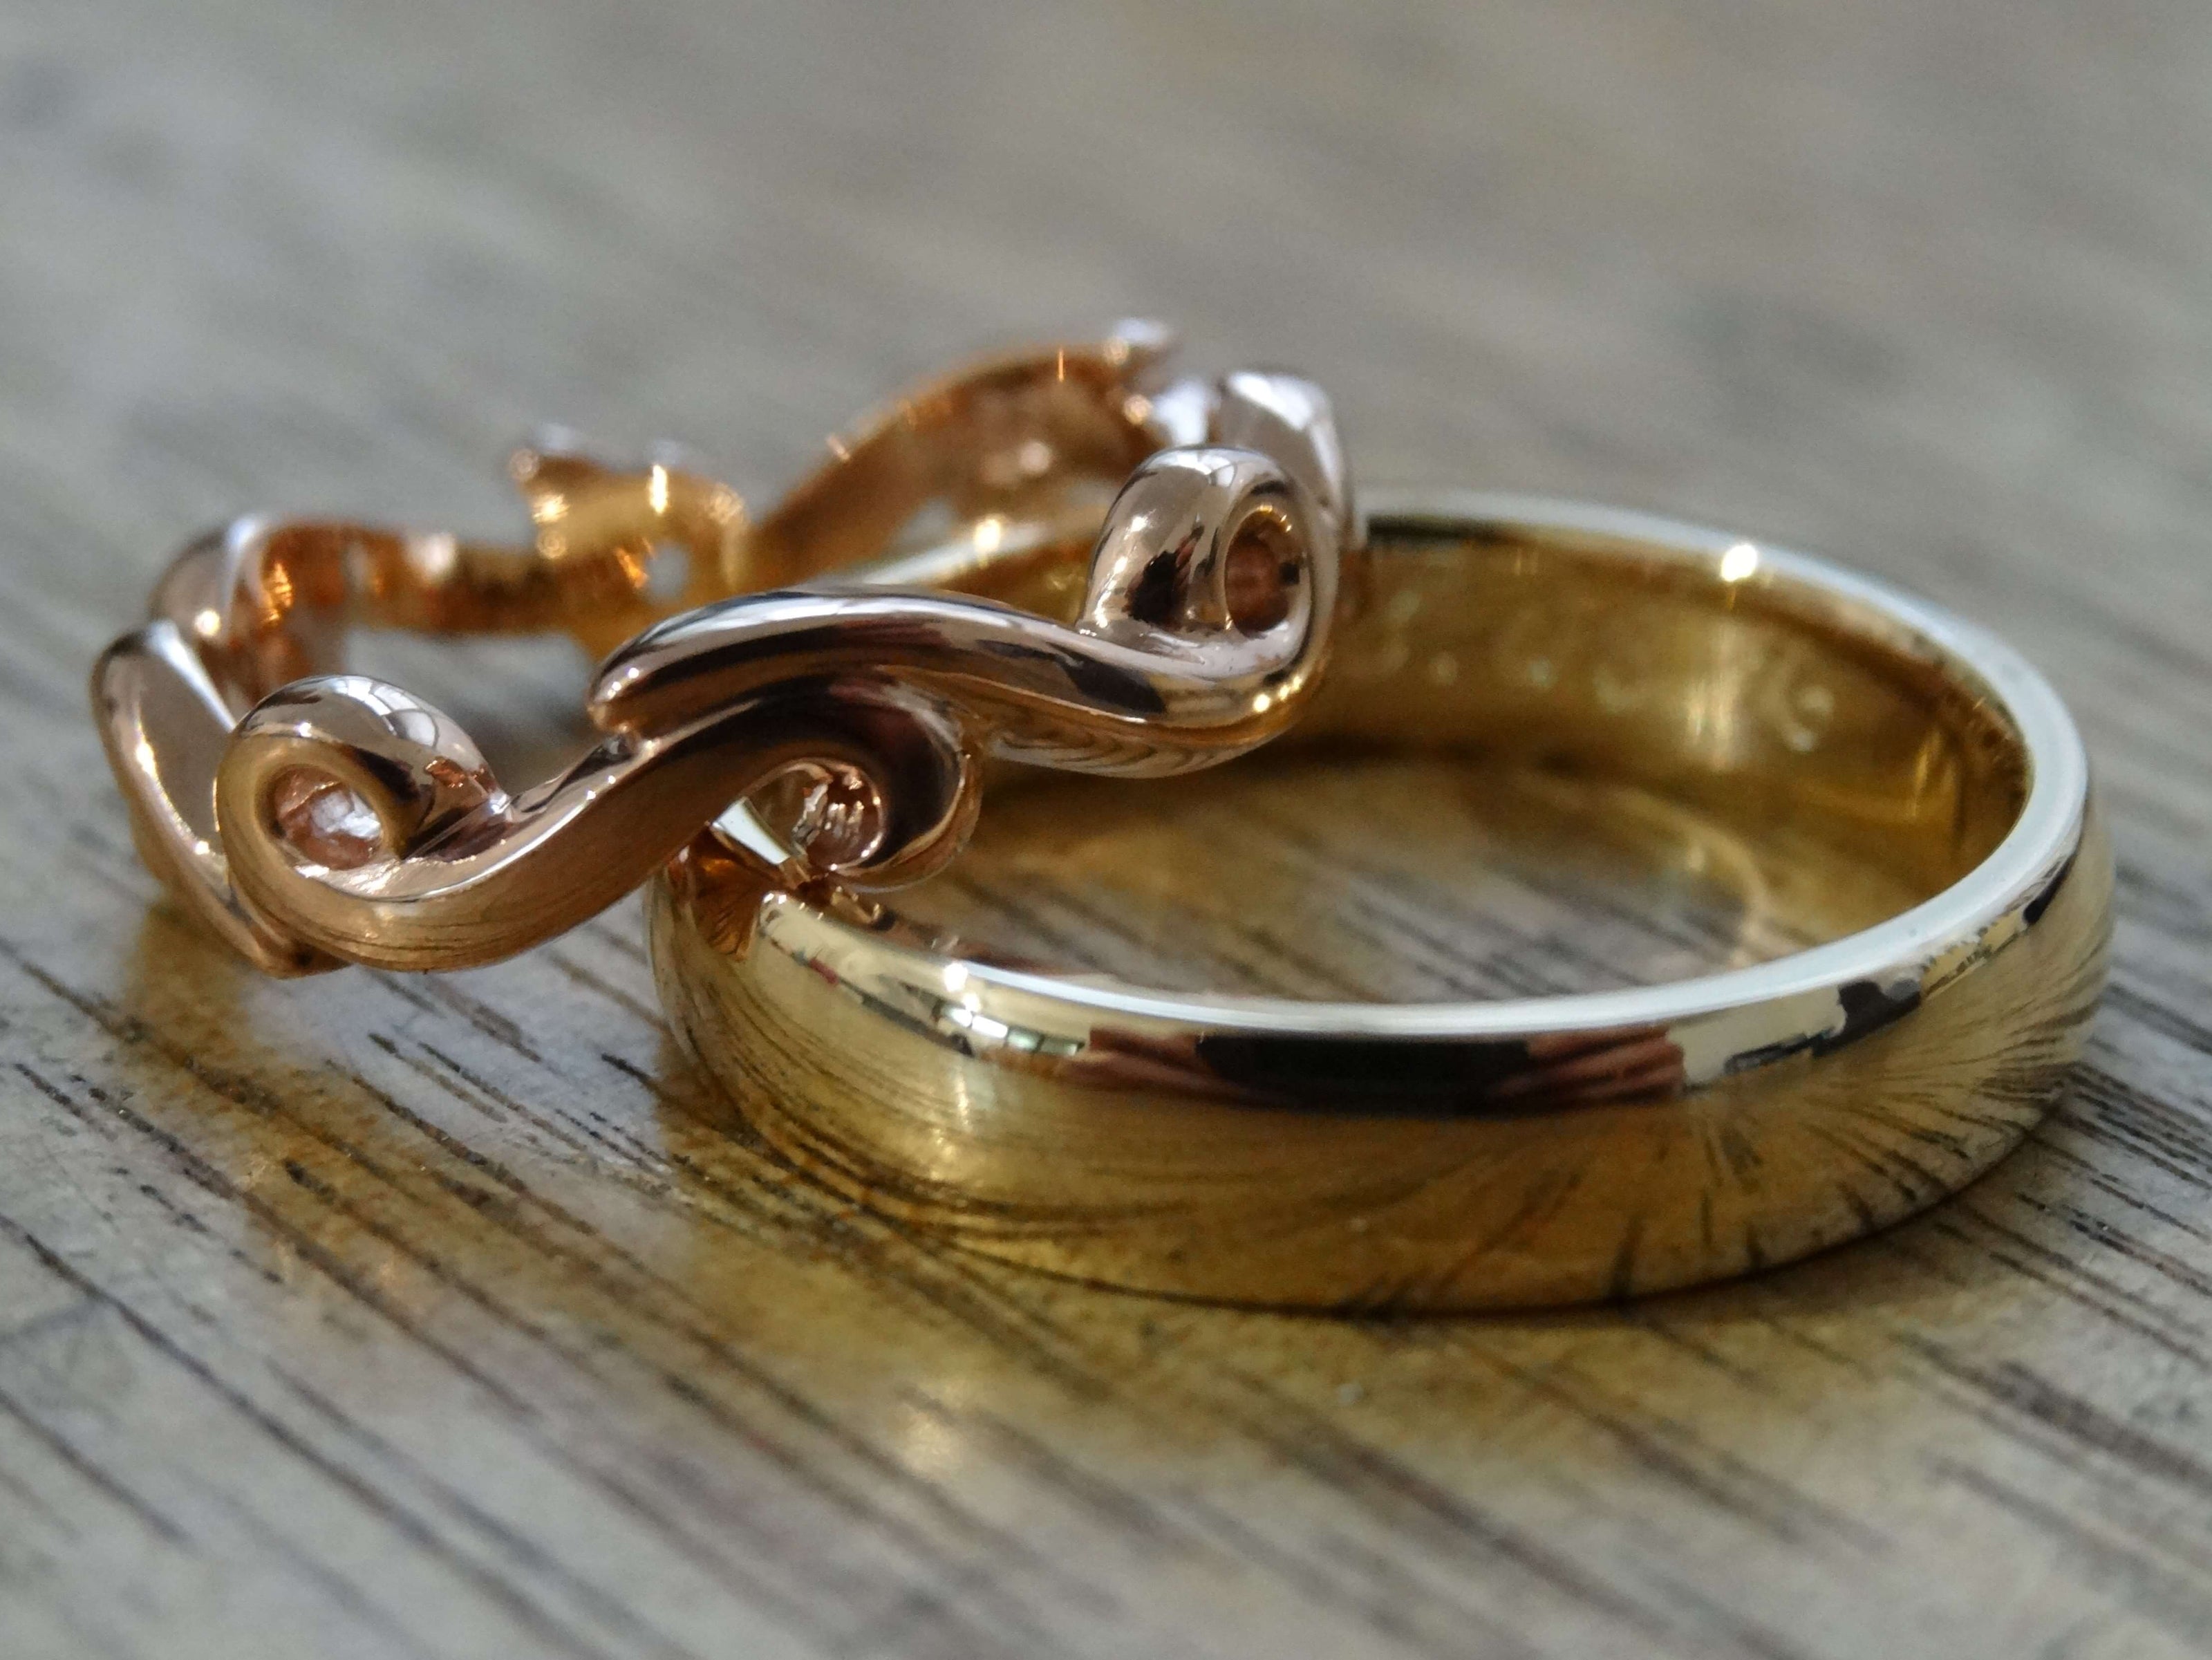 Rose gold continuous swirl wedding ring sitting on top of a yellow gold plain polished wedding ring on a wooden surface